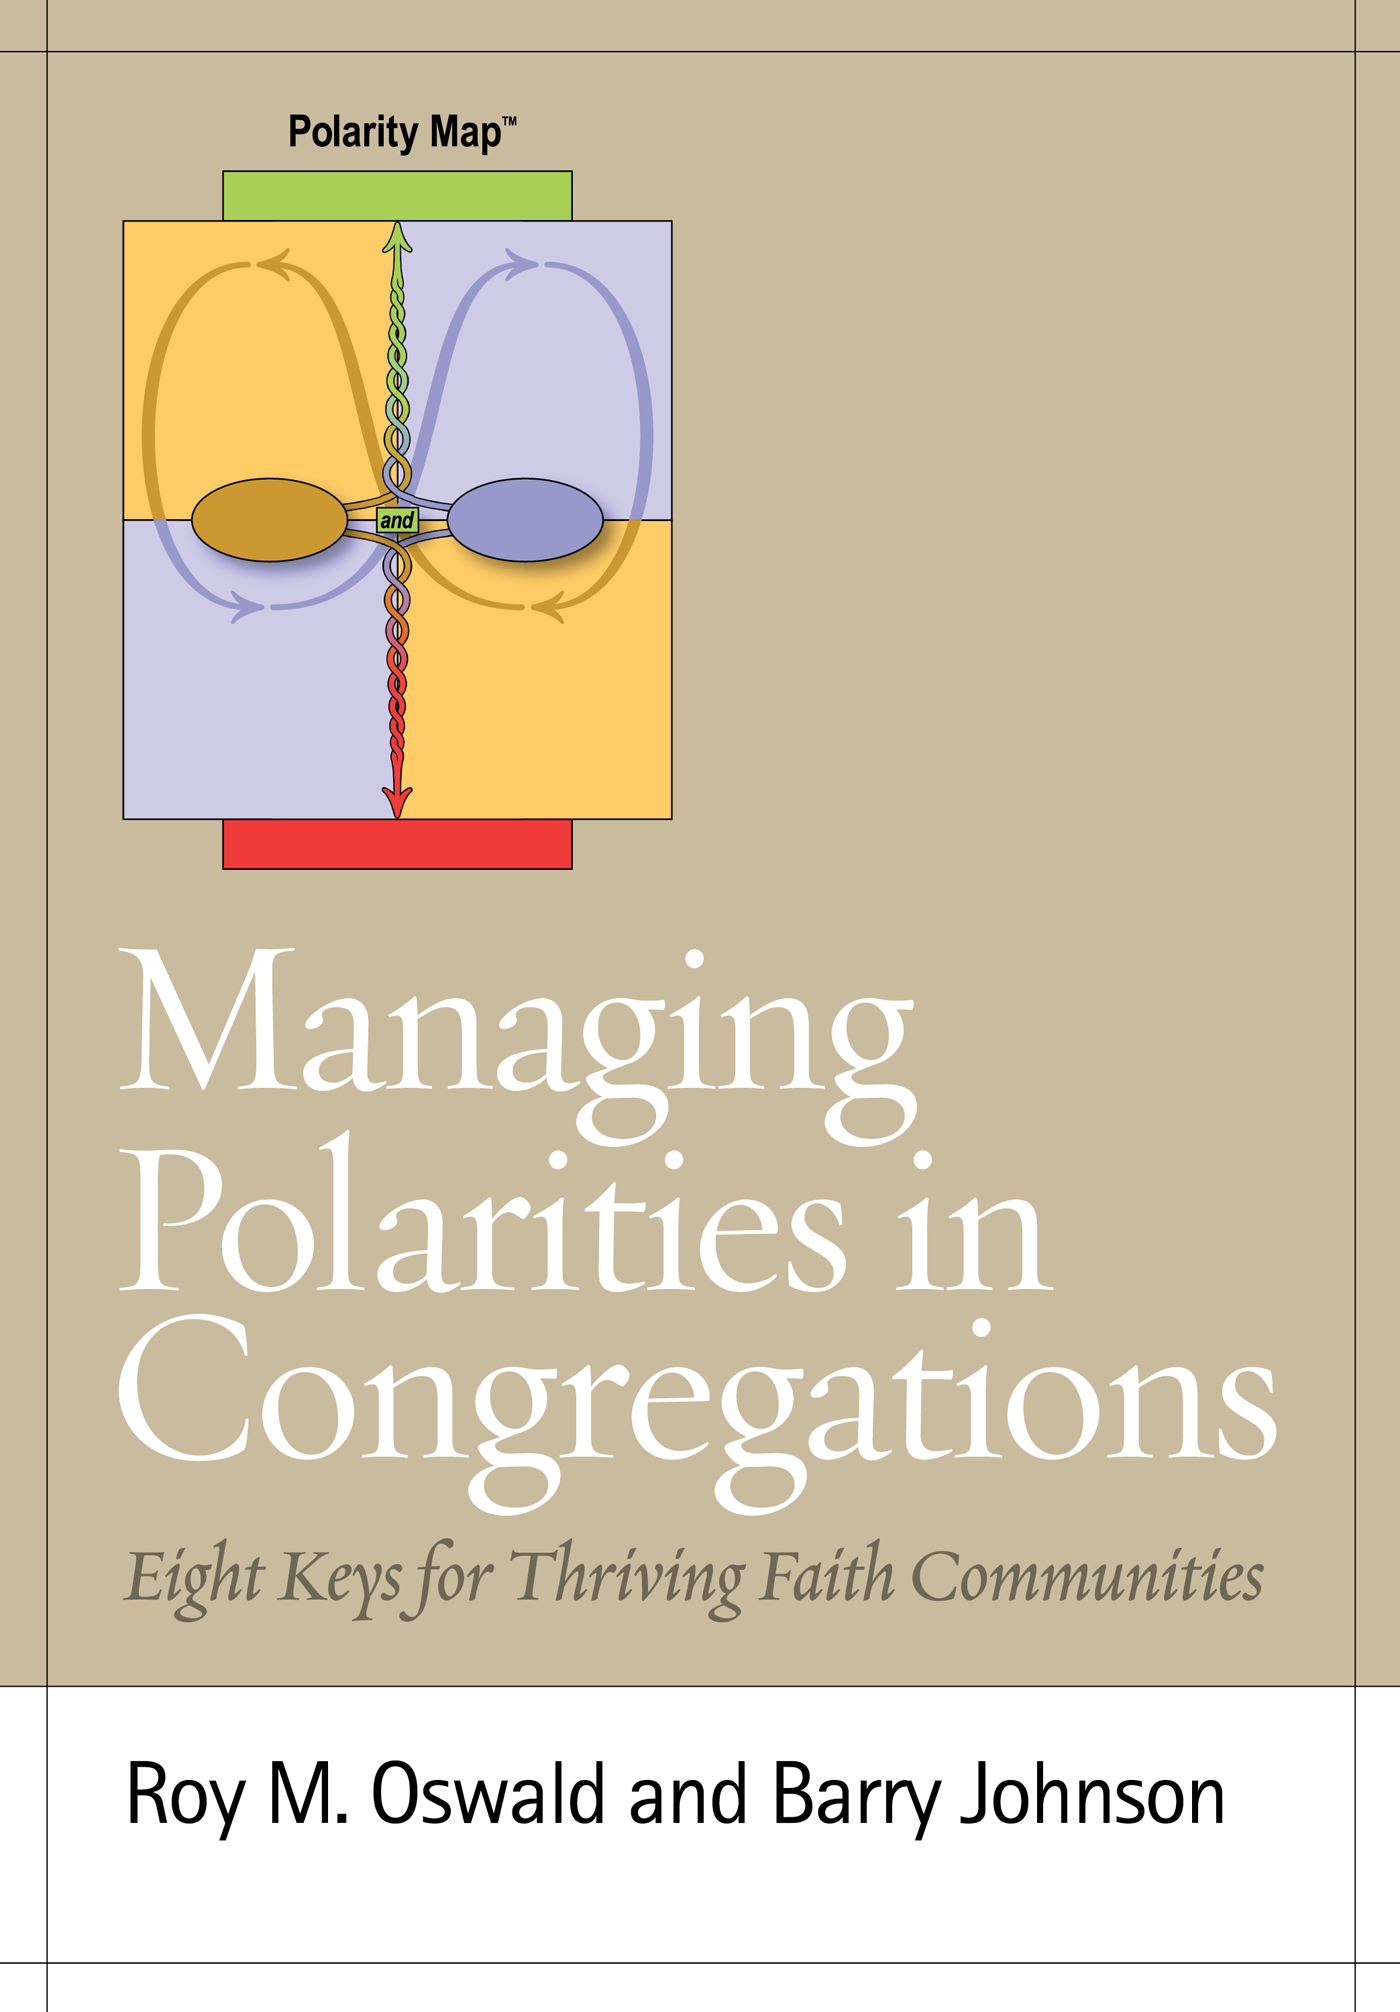 Managing Polarities in Congregations: Eight Keys for Thriving Faith Communities